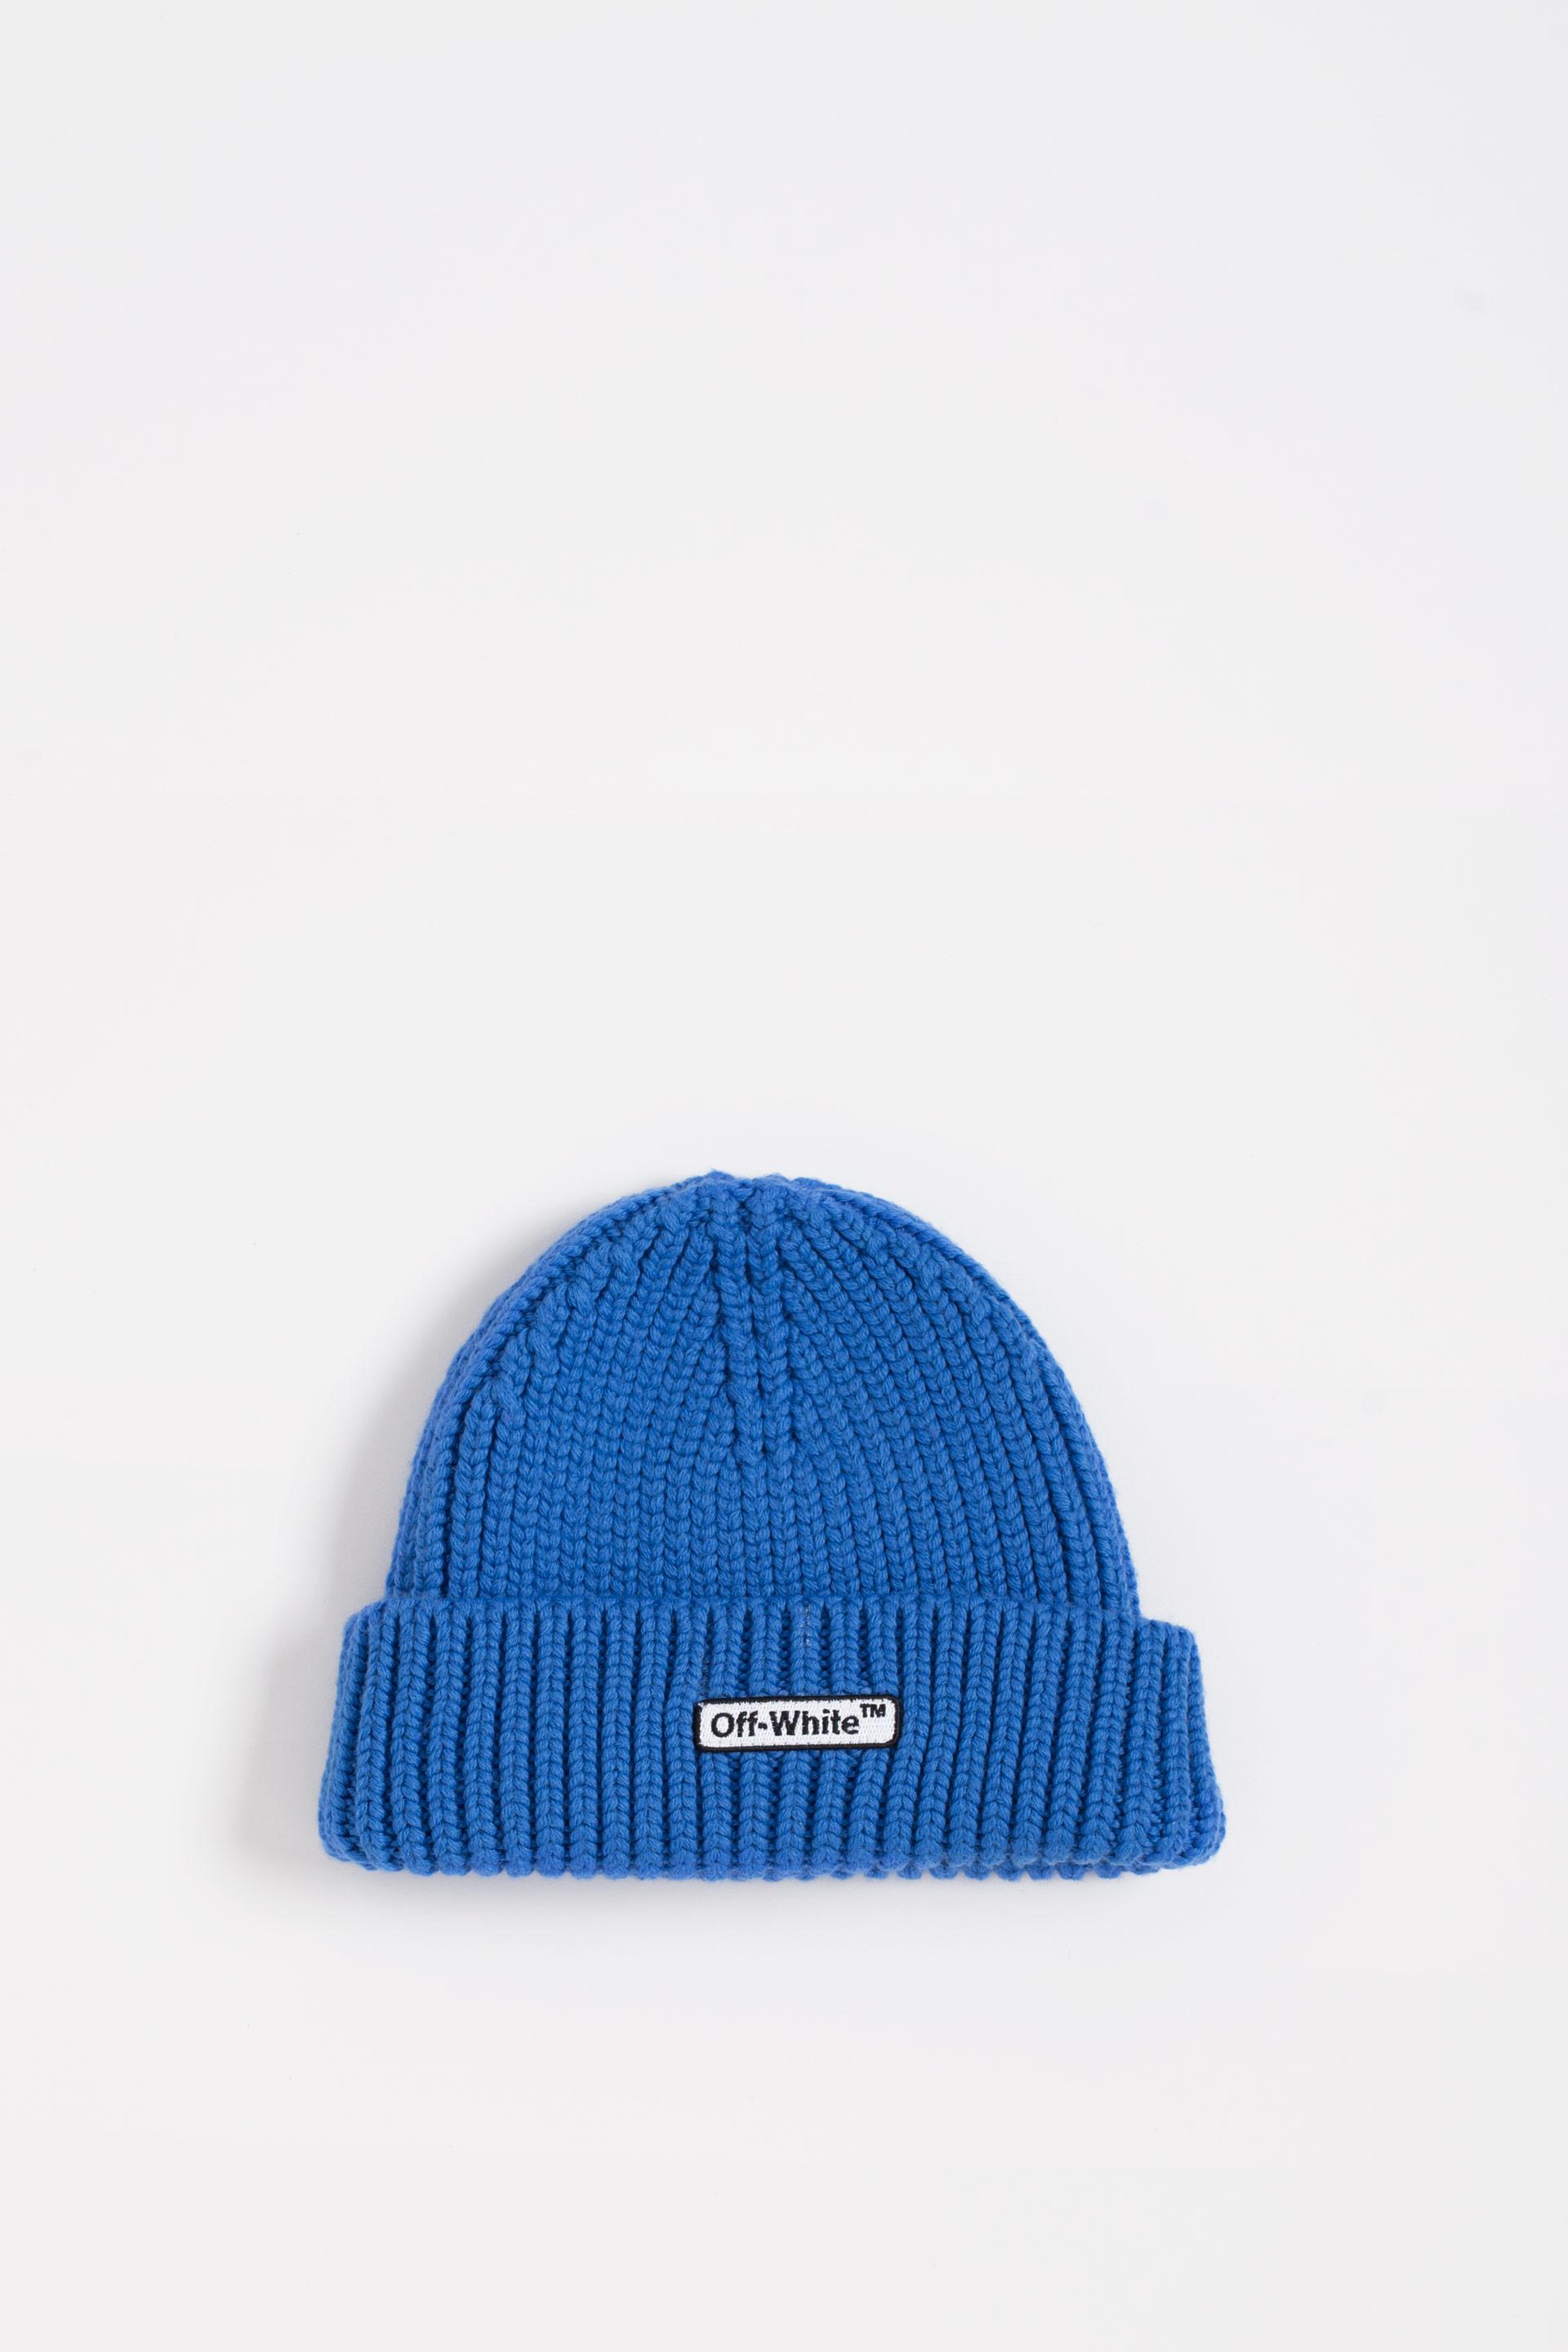 Off-White c/o Virgil Abloh Wool Patch Beanie in Blue for Men - Lyst